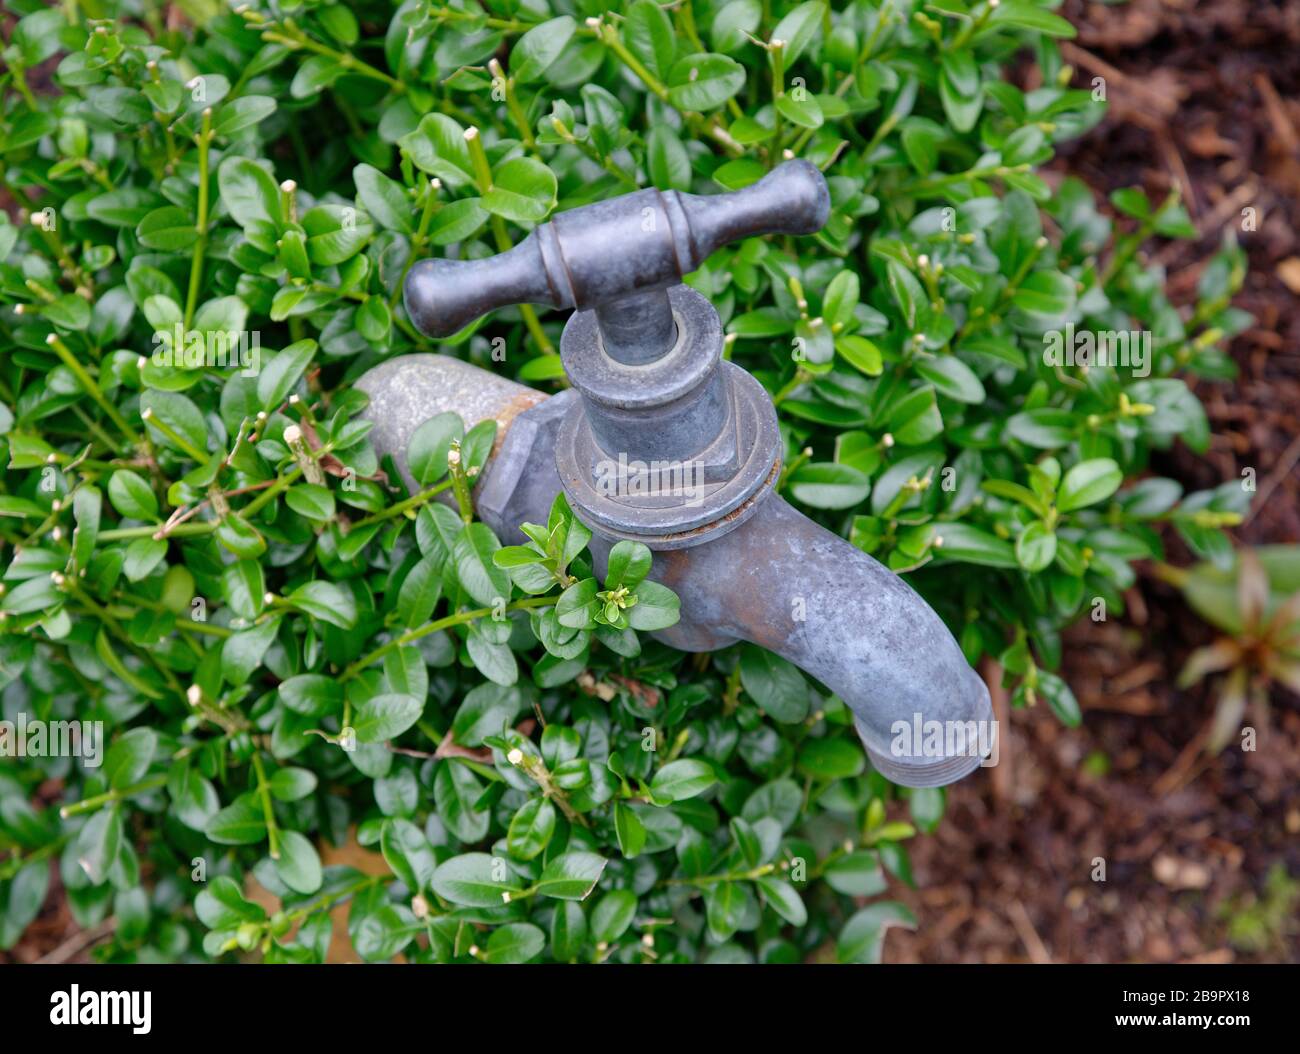 A garden water tap surrounded by plants. Stock Photo